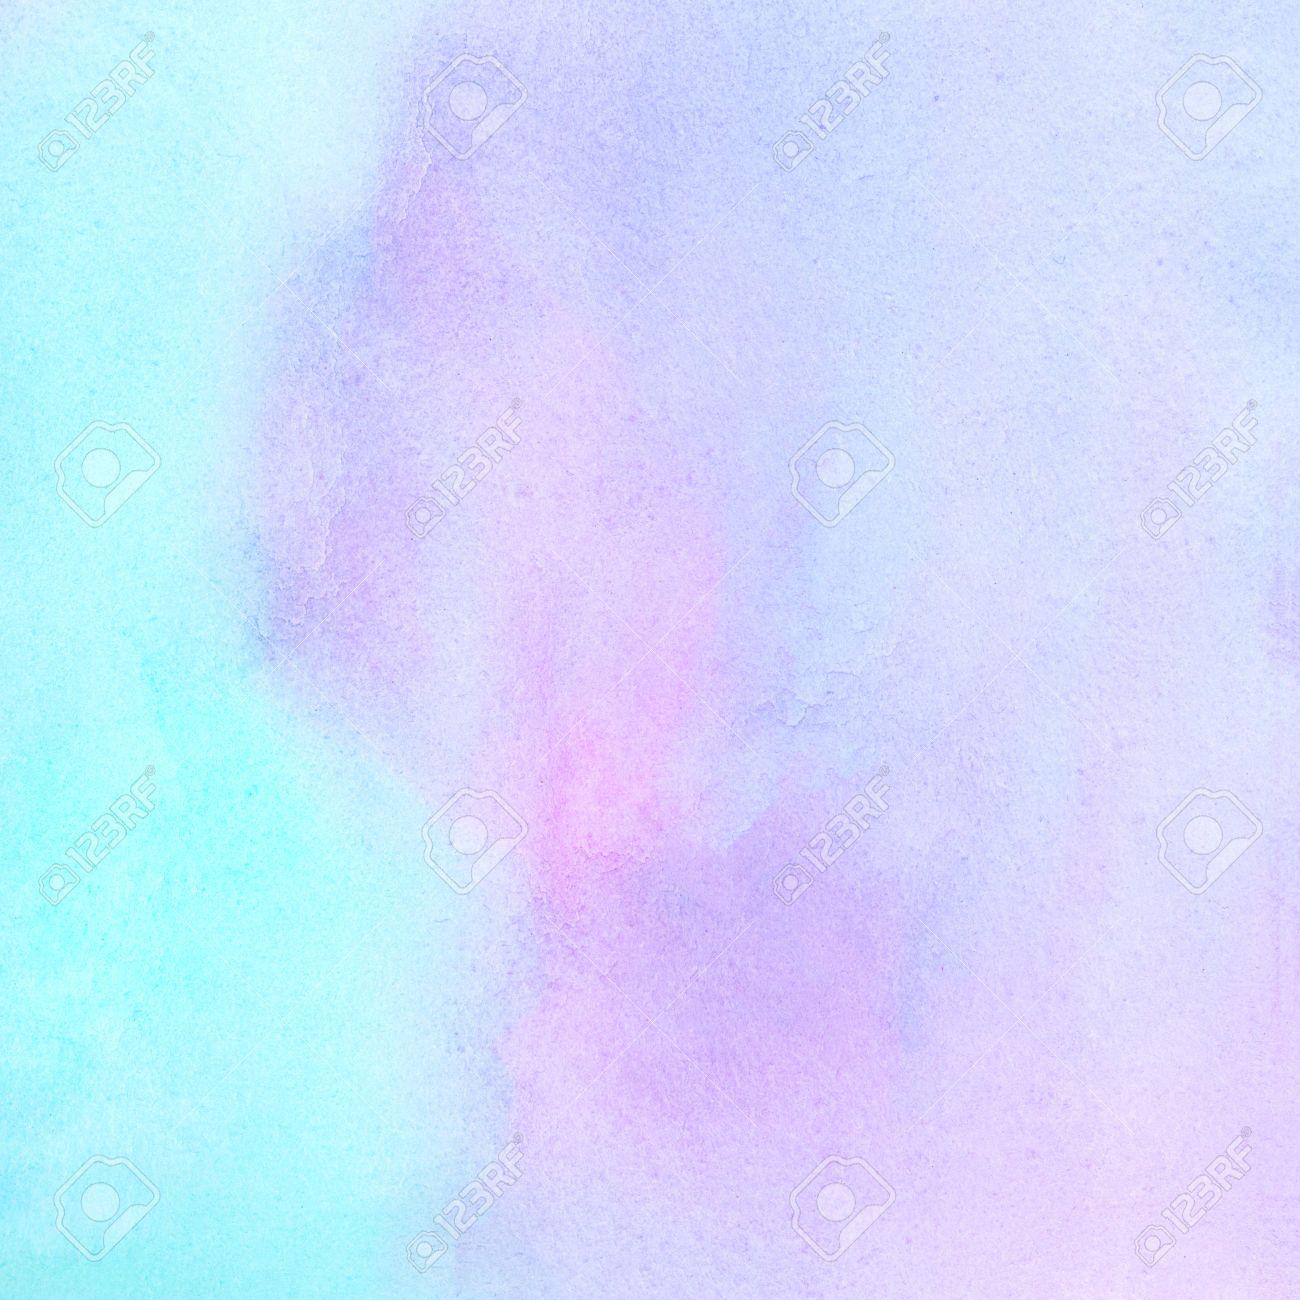 Colorful watercolor stains background. Light pastel colors. Mint